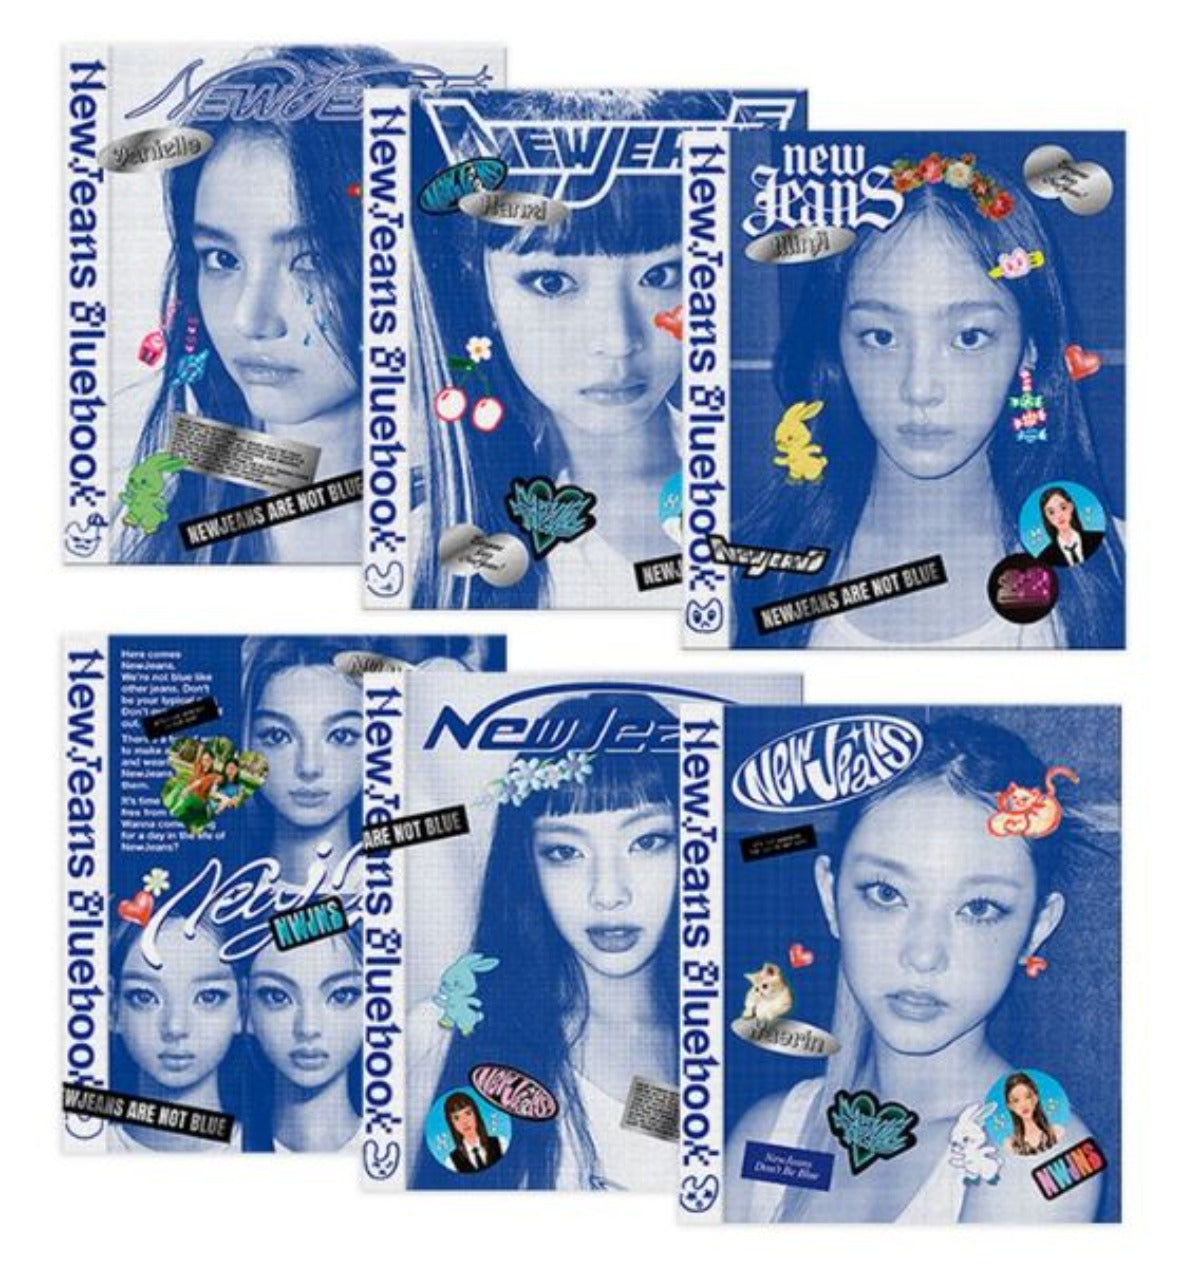 NewJeans New Jeans 1st EP Album Bluebook Version CD+Mini Poster On  Pack+Log/Pin-up Book+Phoning Manual Book+ID Card+Sticker  Pack+Photocard+Tracking